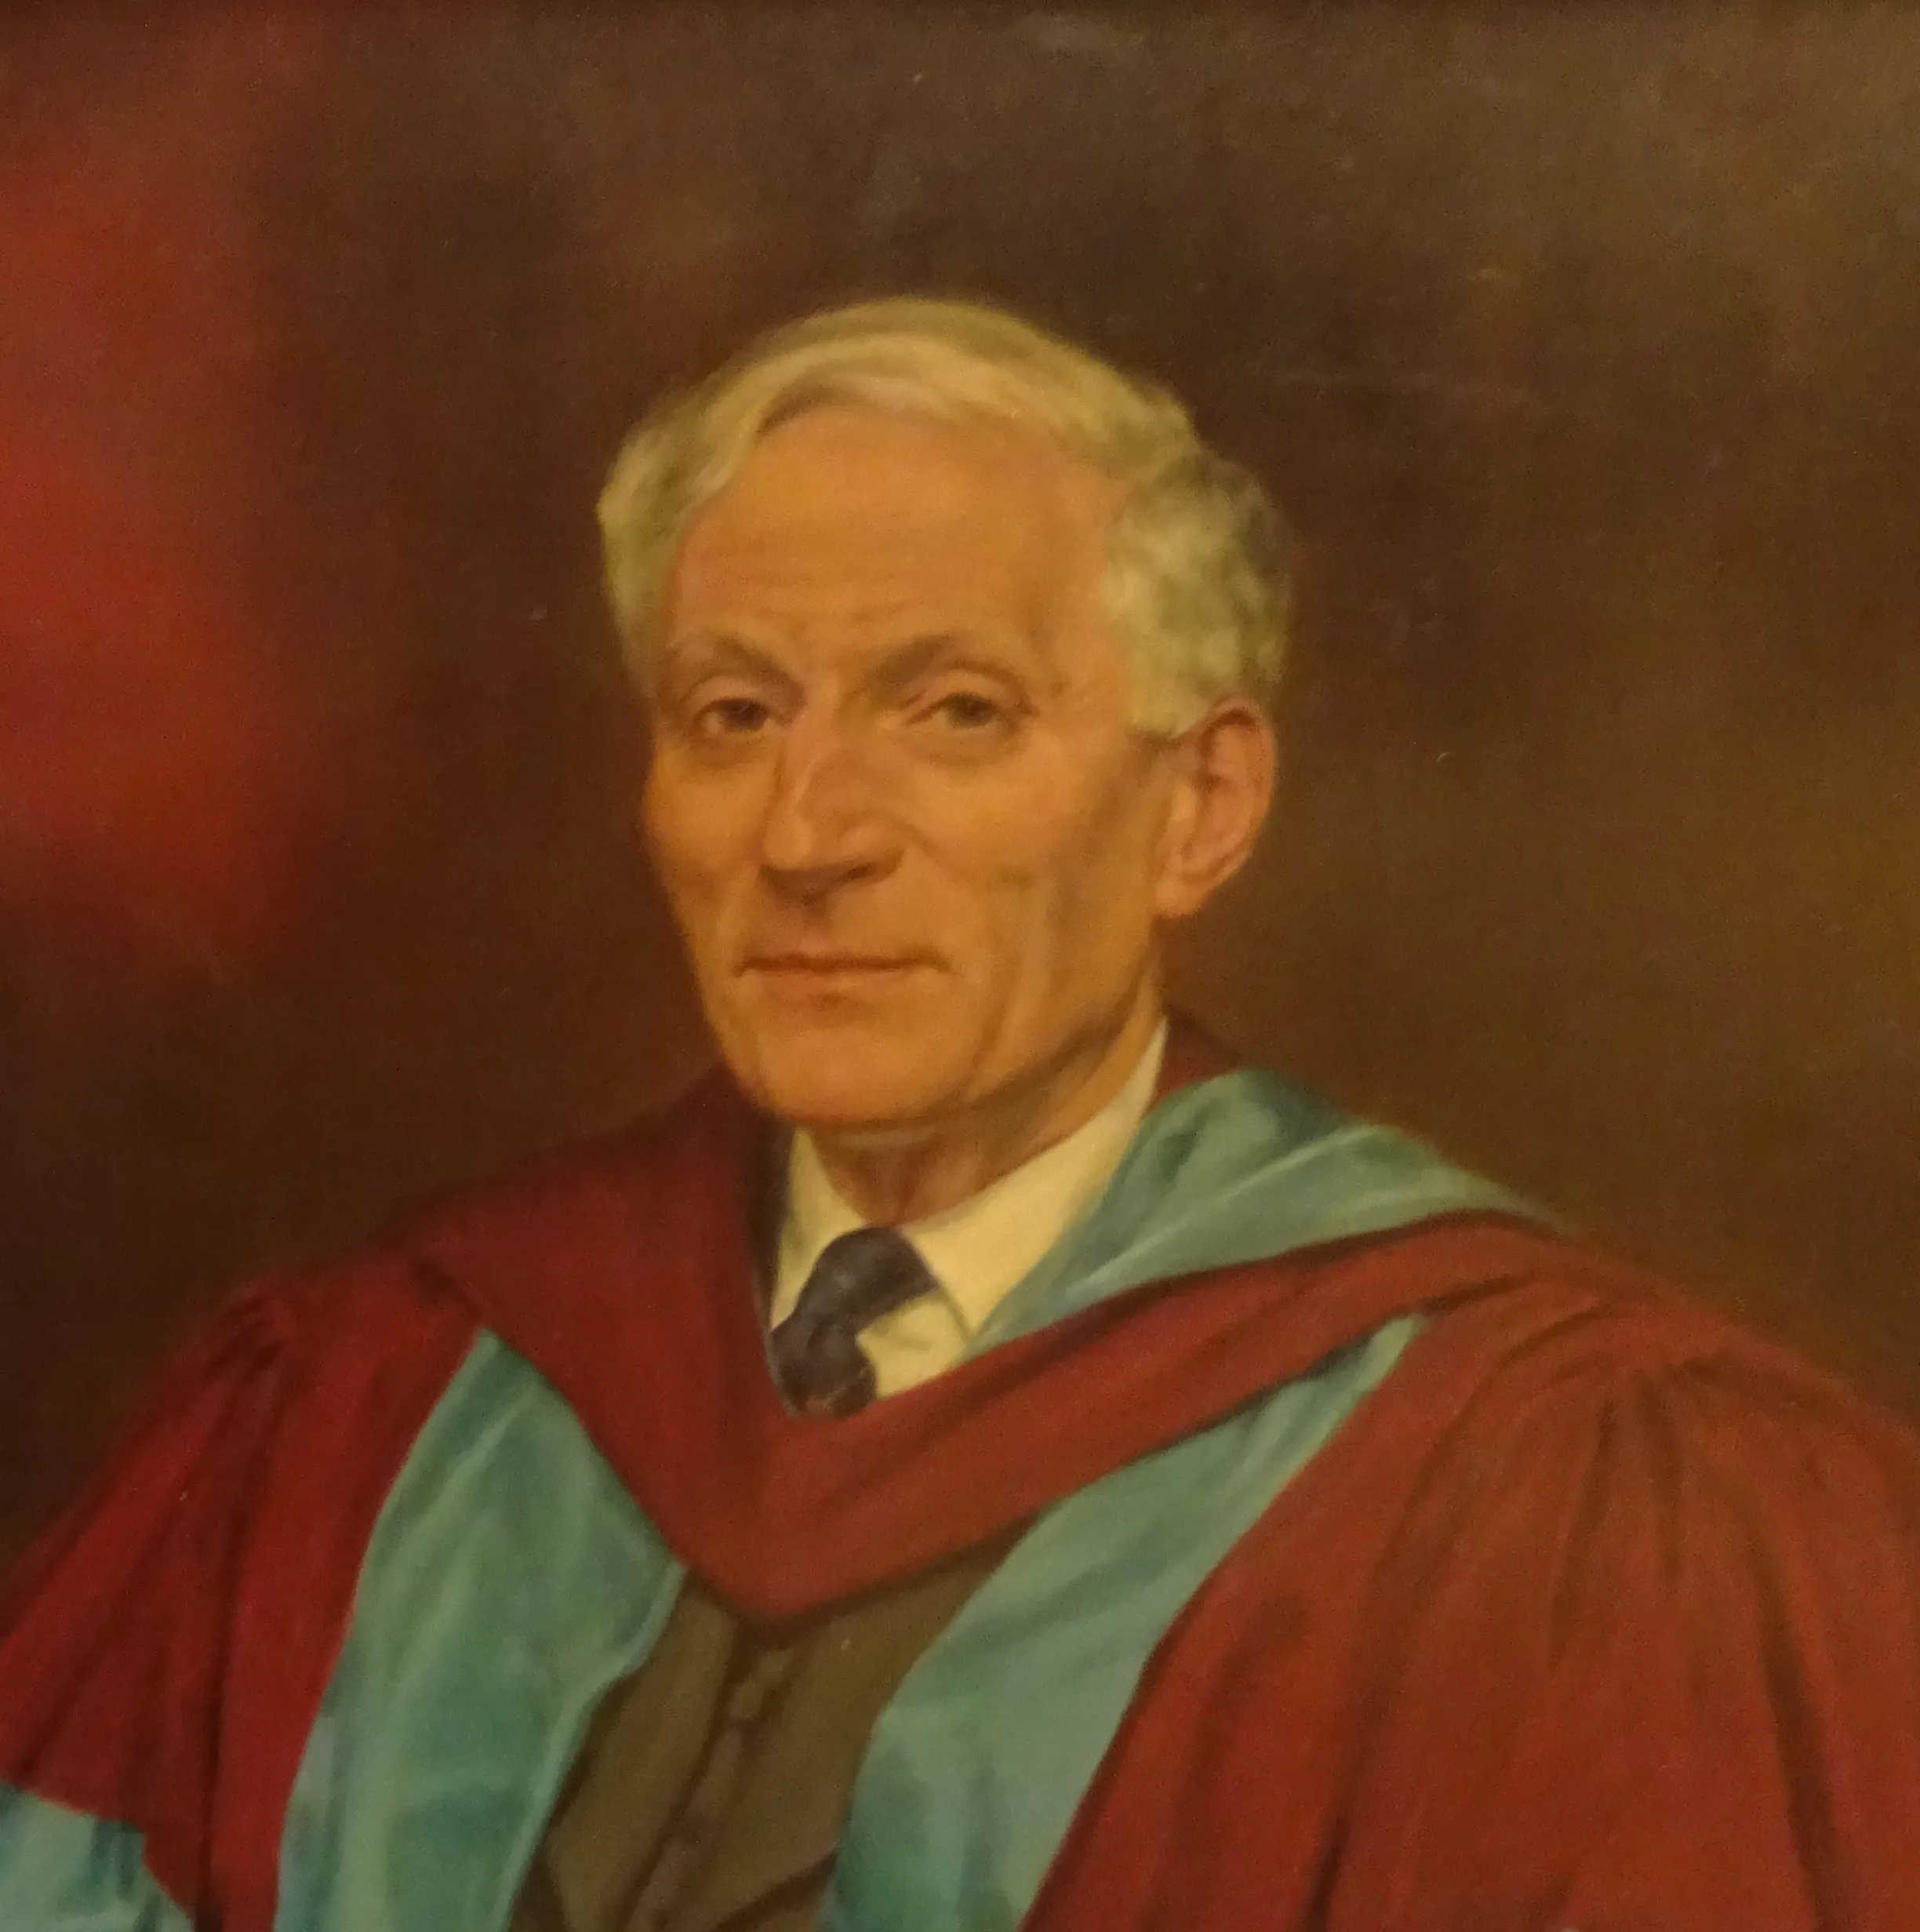 Portrait of Sir Eric Zepler, IERE President 1959 and founder of the Department of Electronics, Telecommunications and Radio Engineering at the University of Southampton ref. OPC/2/73